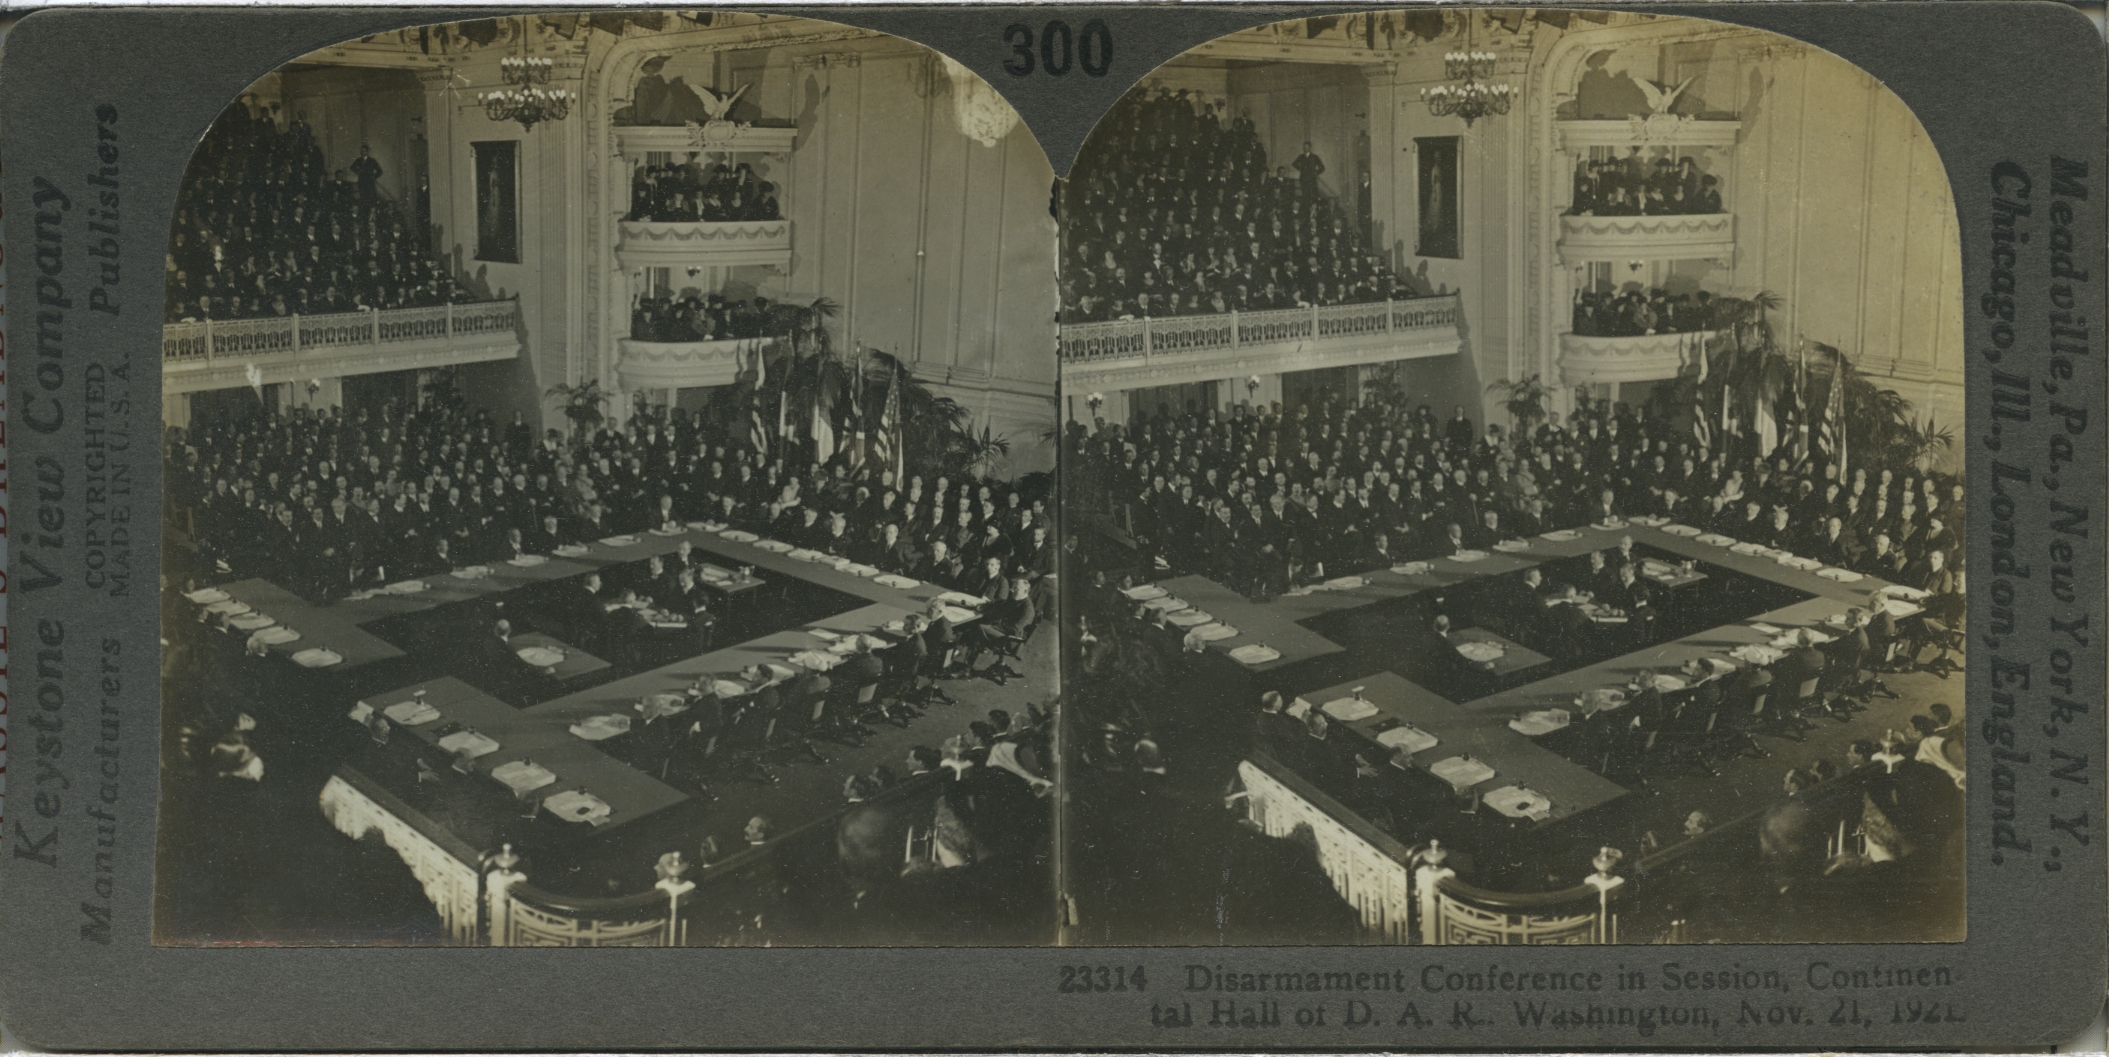 World Disarmament Conference. Delegates in Session. Continental Hall of the D.A.R., Washington, D.C., Nov. 21, 1921